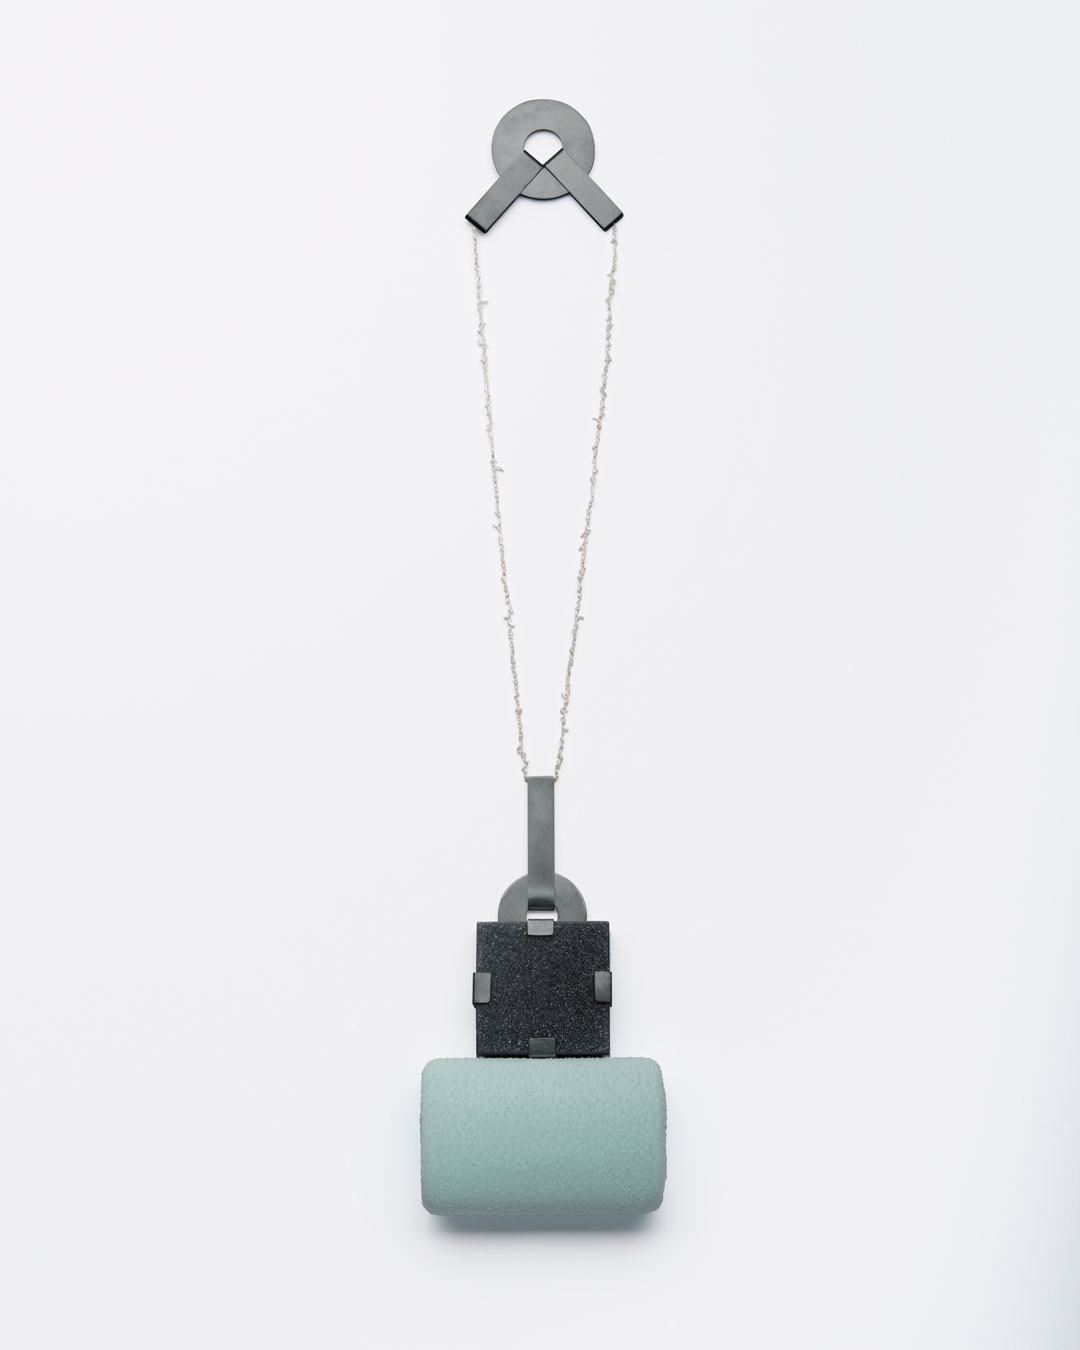 Ute Eitzenhöfer, untitled, 2013, necklace; agate, pearls, oxidised silver, plastic (from packaging), 300 x 300 x 30 mm